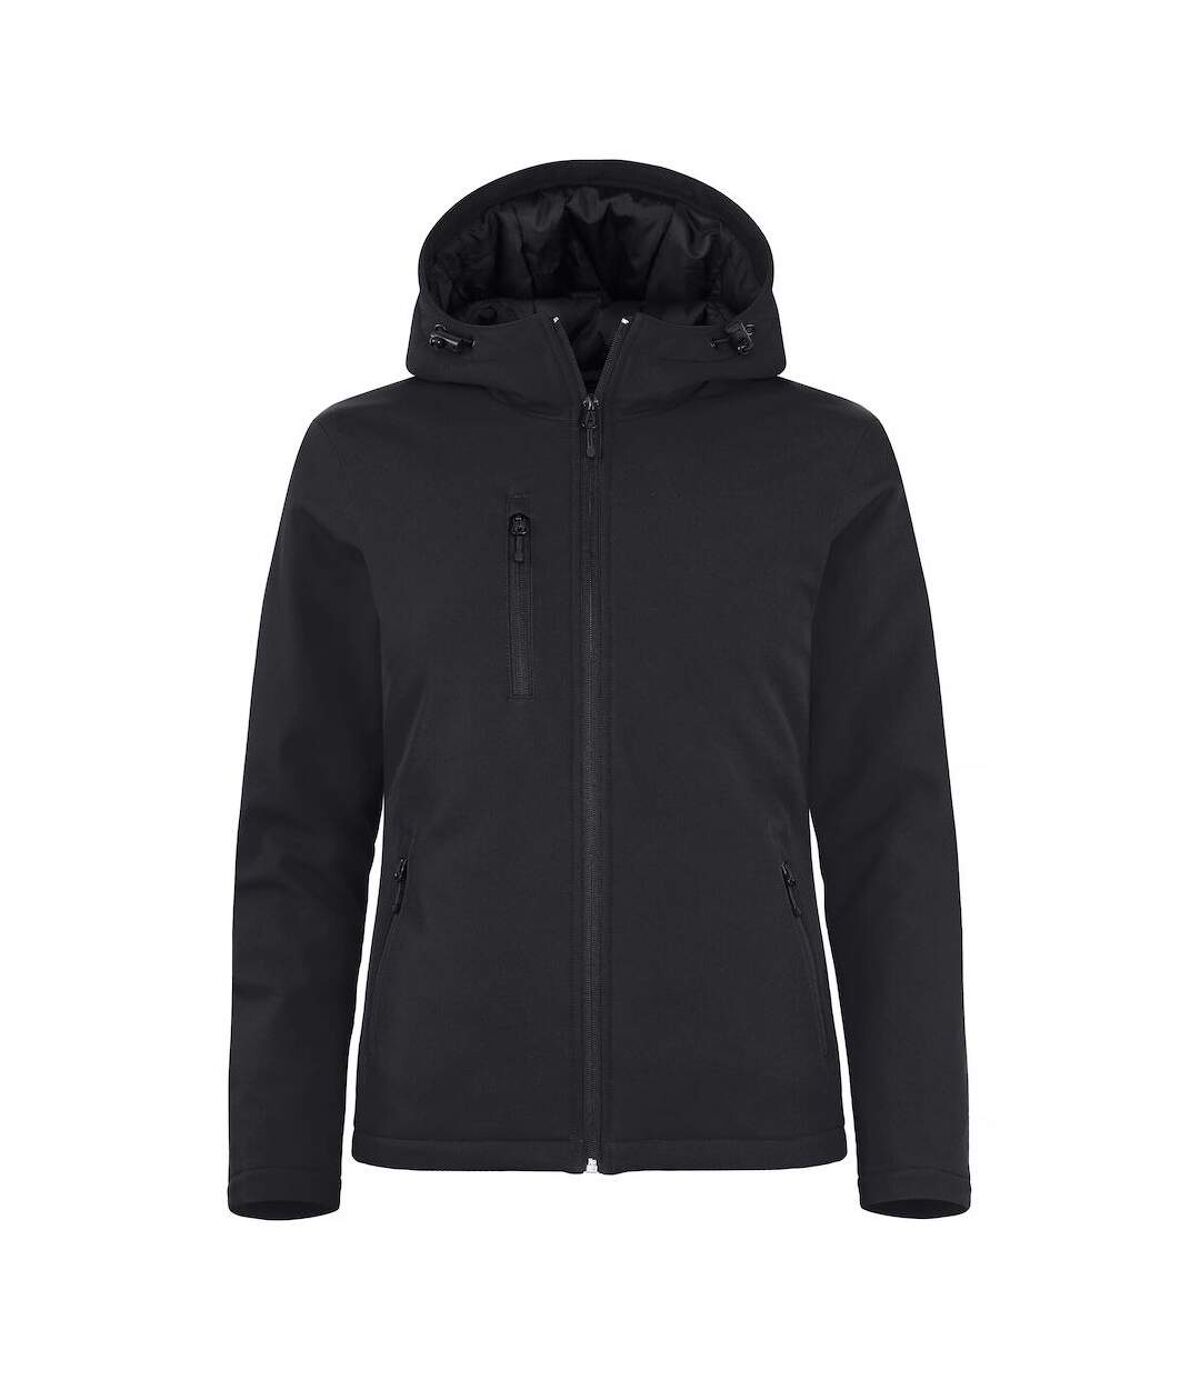 Clique Womens/Ladies Padded Soft Shell Jacket (Black)